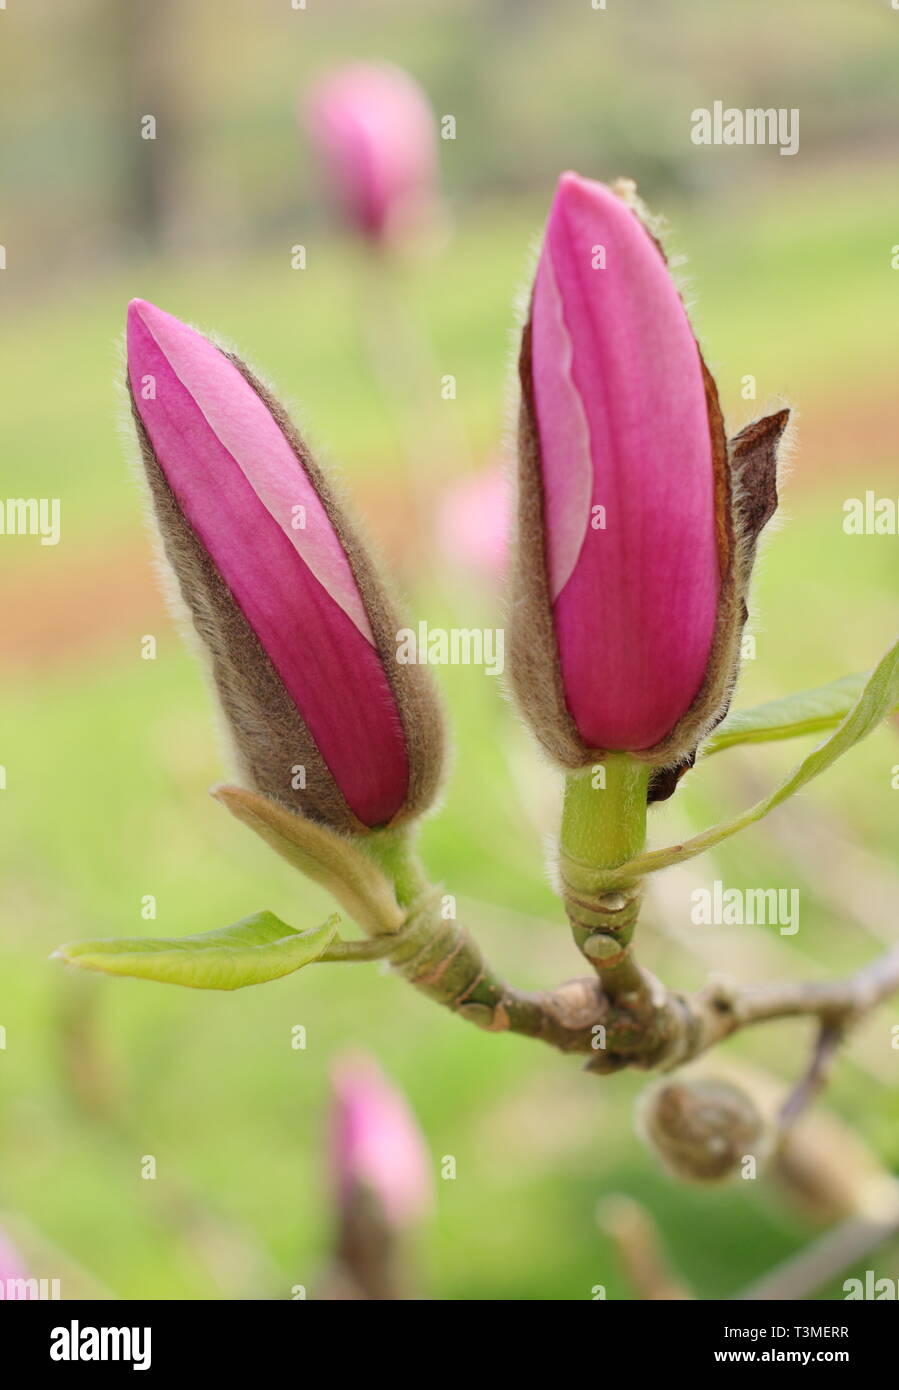 Magnolia 'Serene'.  Large deep pink flower buds of characeristically late blooming Magnolia 'Serene' in an English garden - April, UK Stock Photo